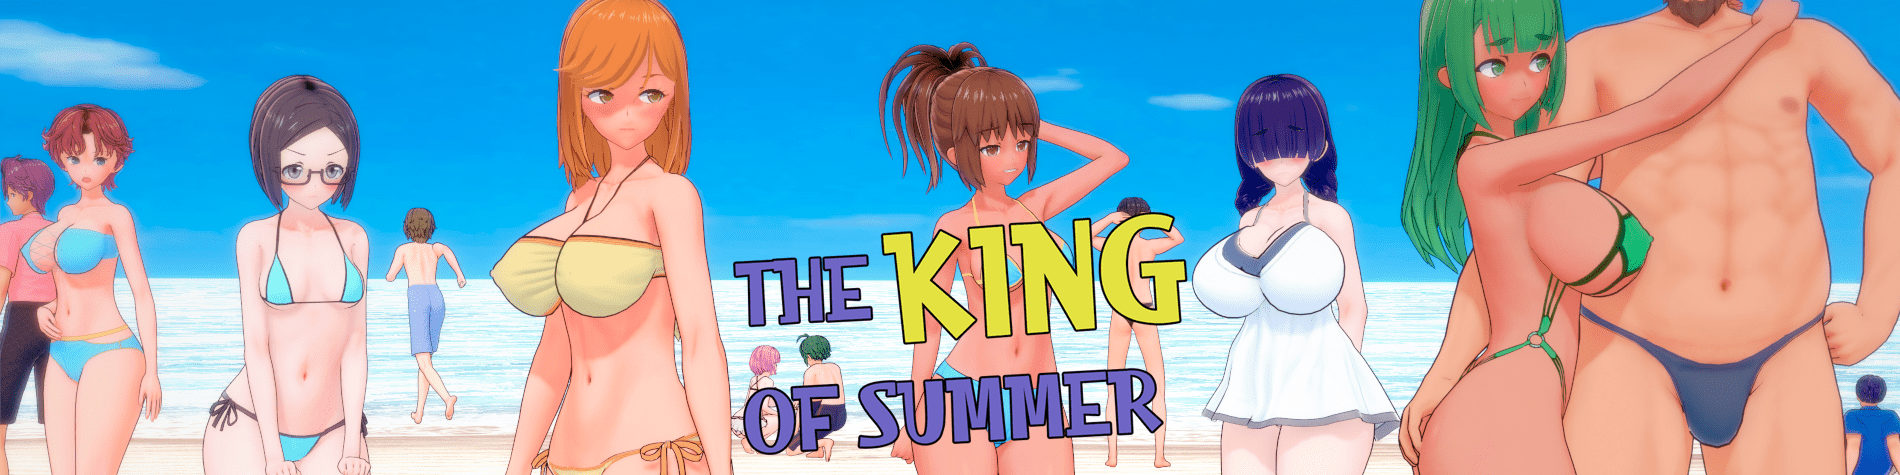 The King of Summer v0.4.8 [No Try Studios]